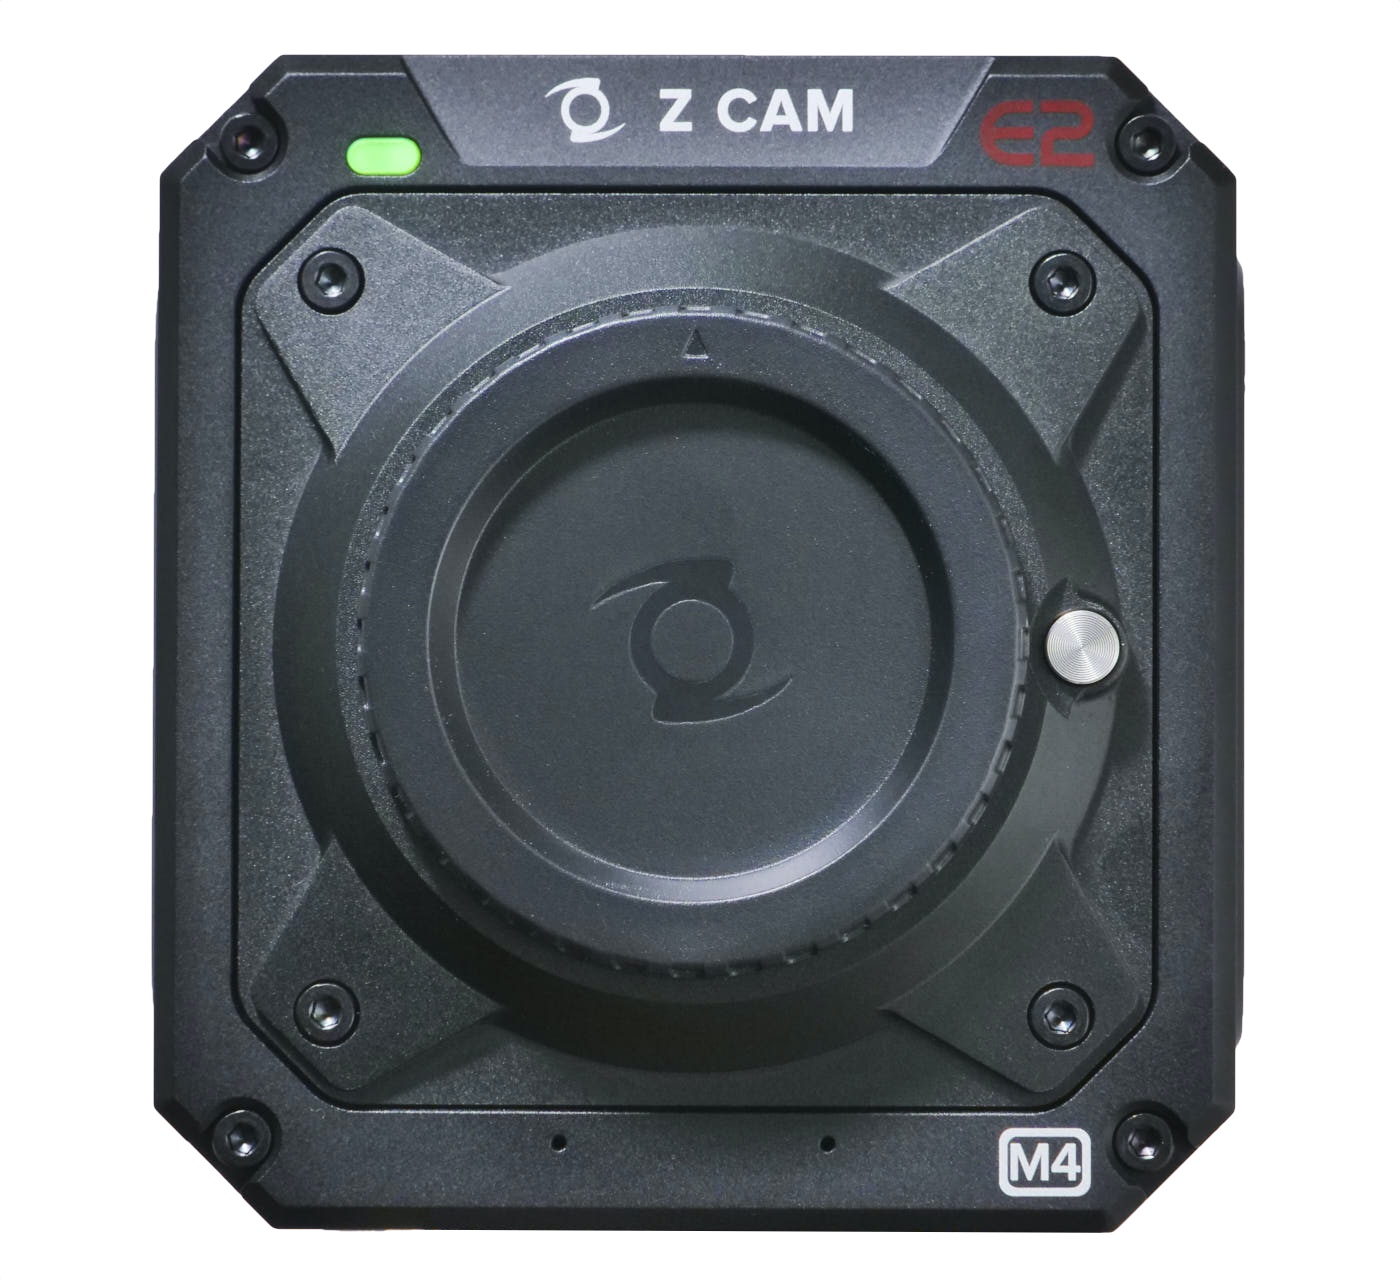 Z Cam E2-M4 front, MFT mount, with body cap in place